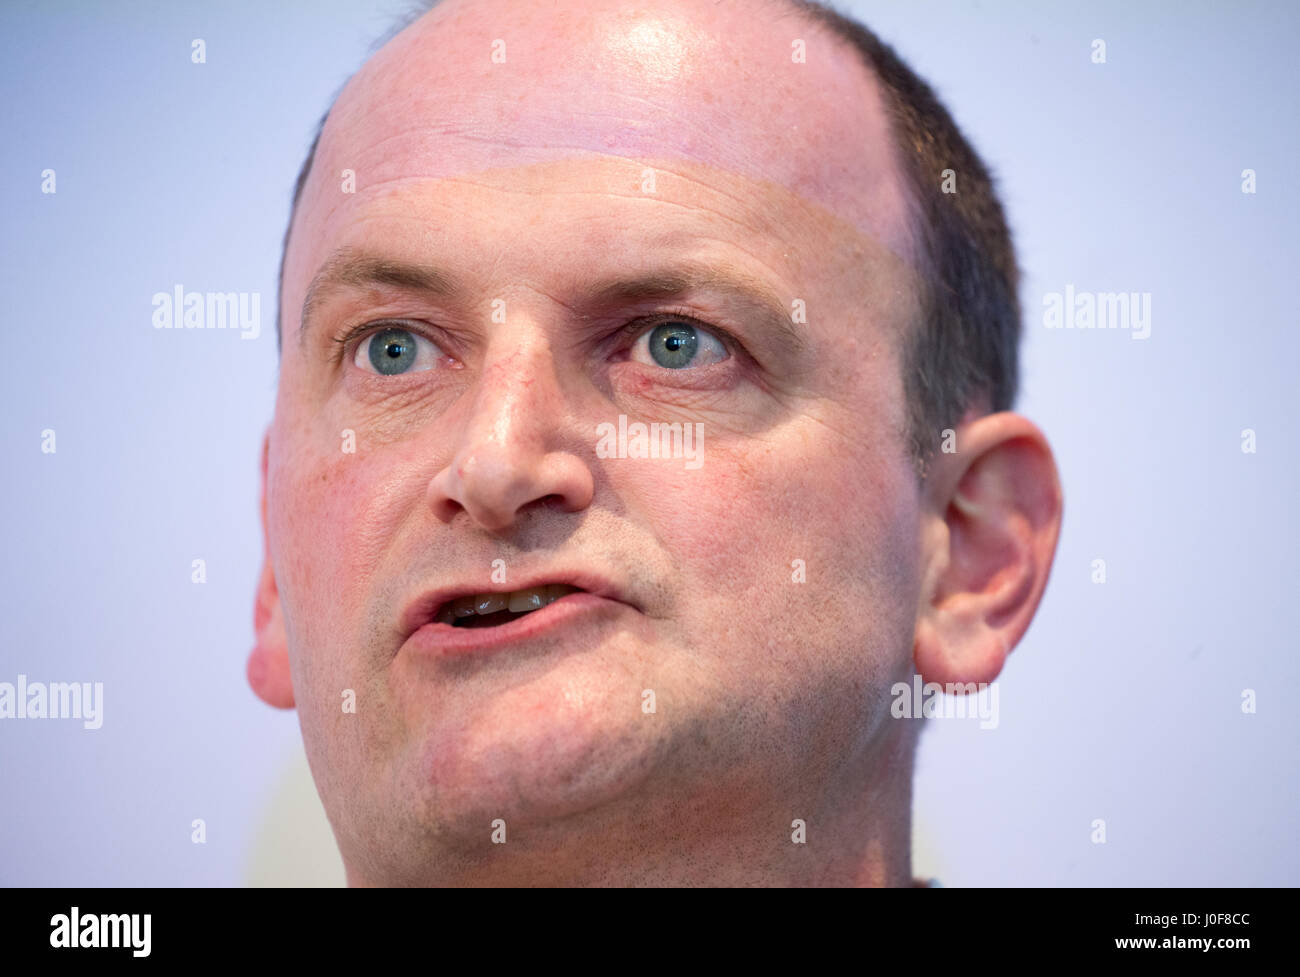 Douglas carswell,former UKIP Mp for Clacton, now independent,launches his new book 'Rebel: How to overthrow the emerging oligarchy' Stock Photo